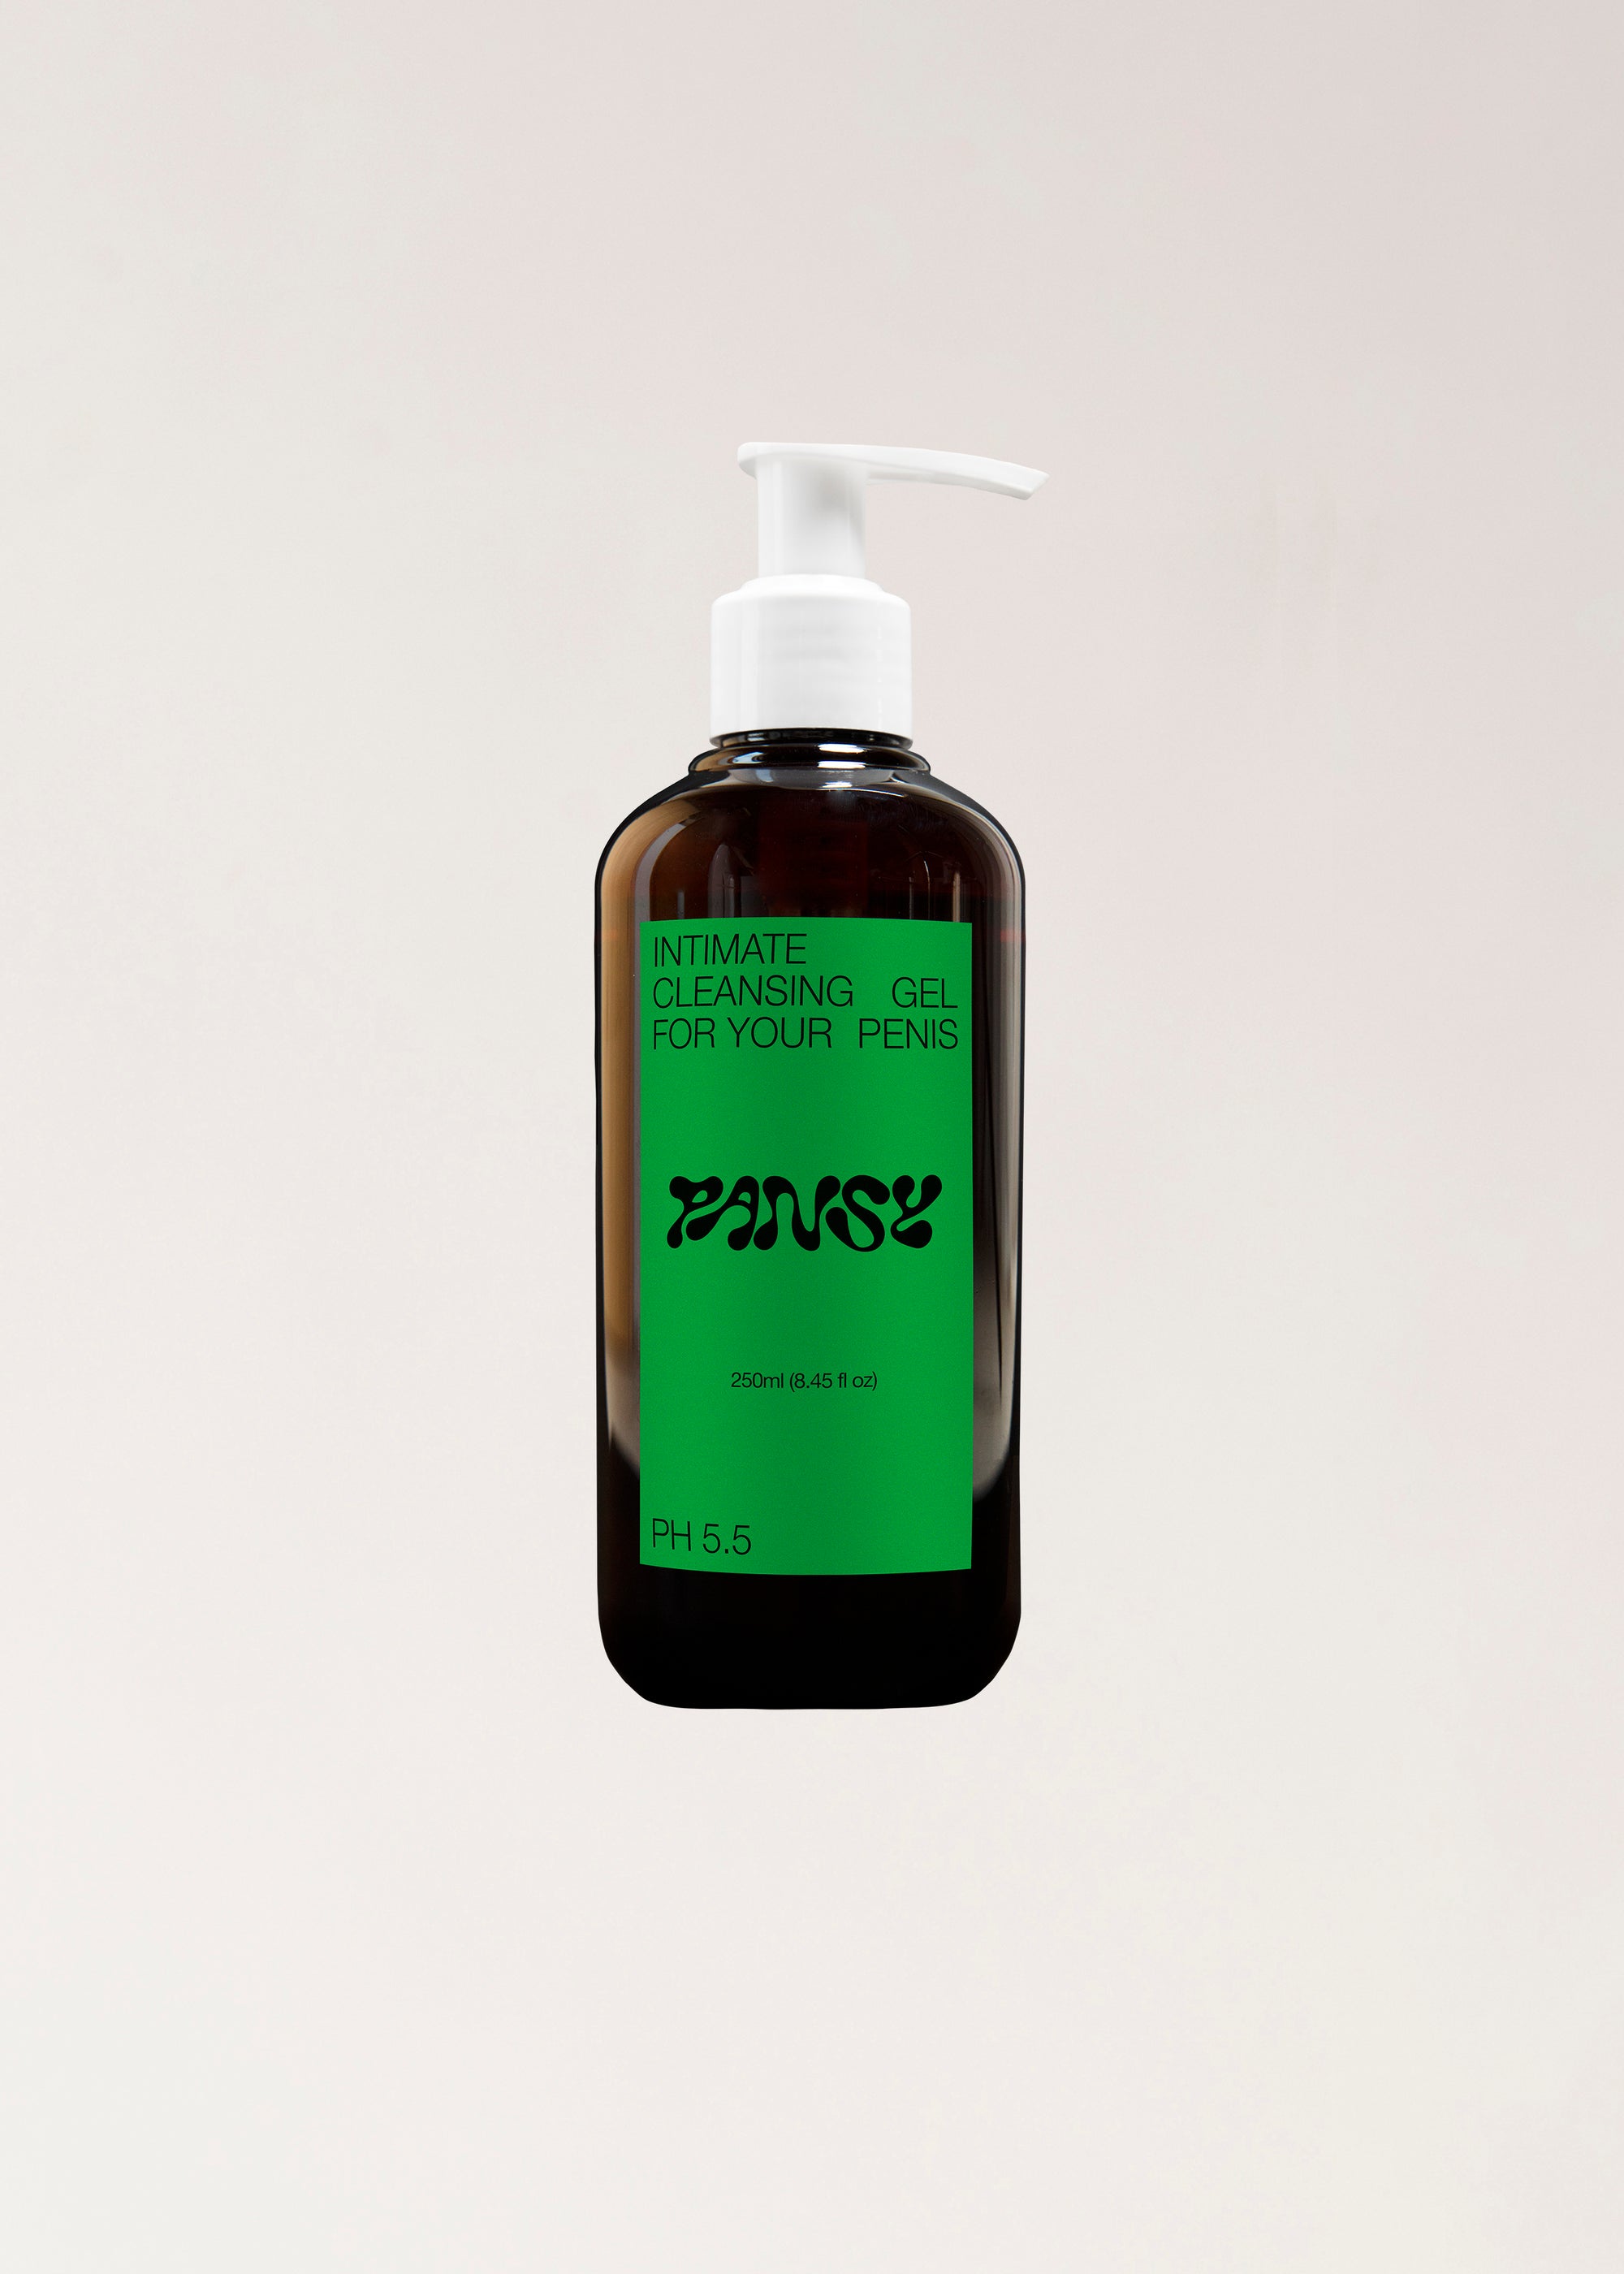 INTIMATE CLEANSING GEL FOR YOUR PENIS (pH 5.5)